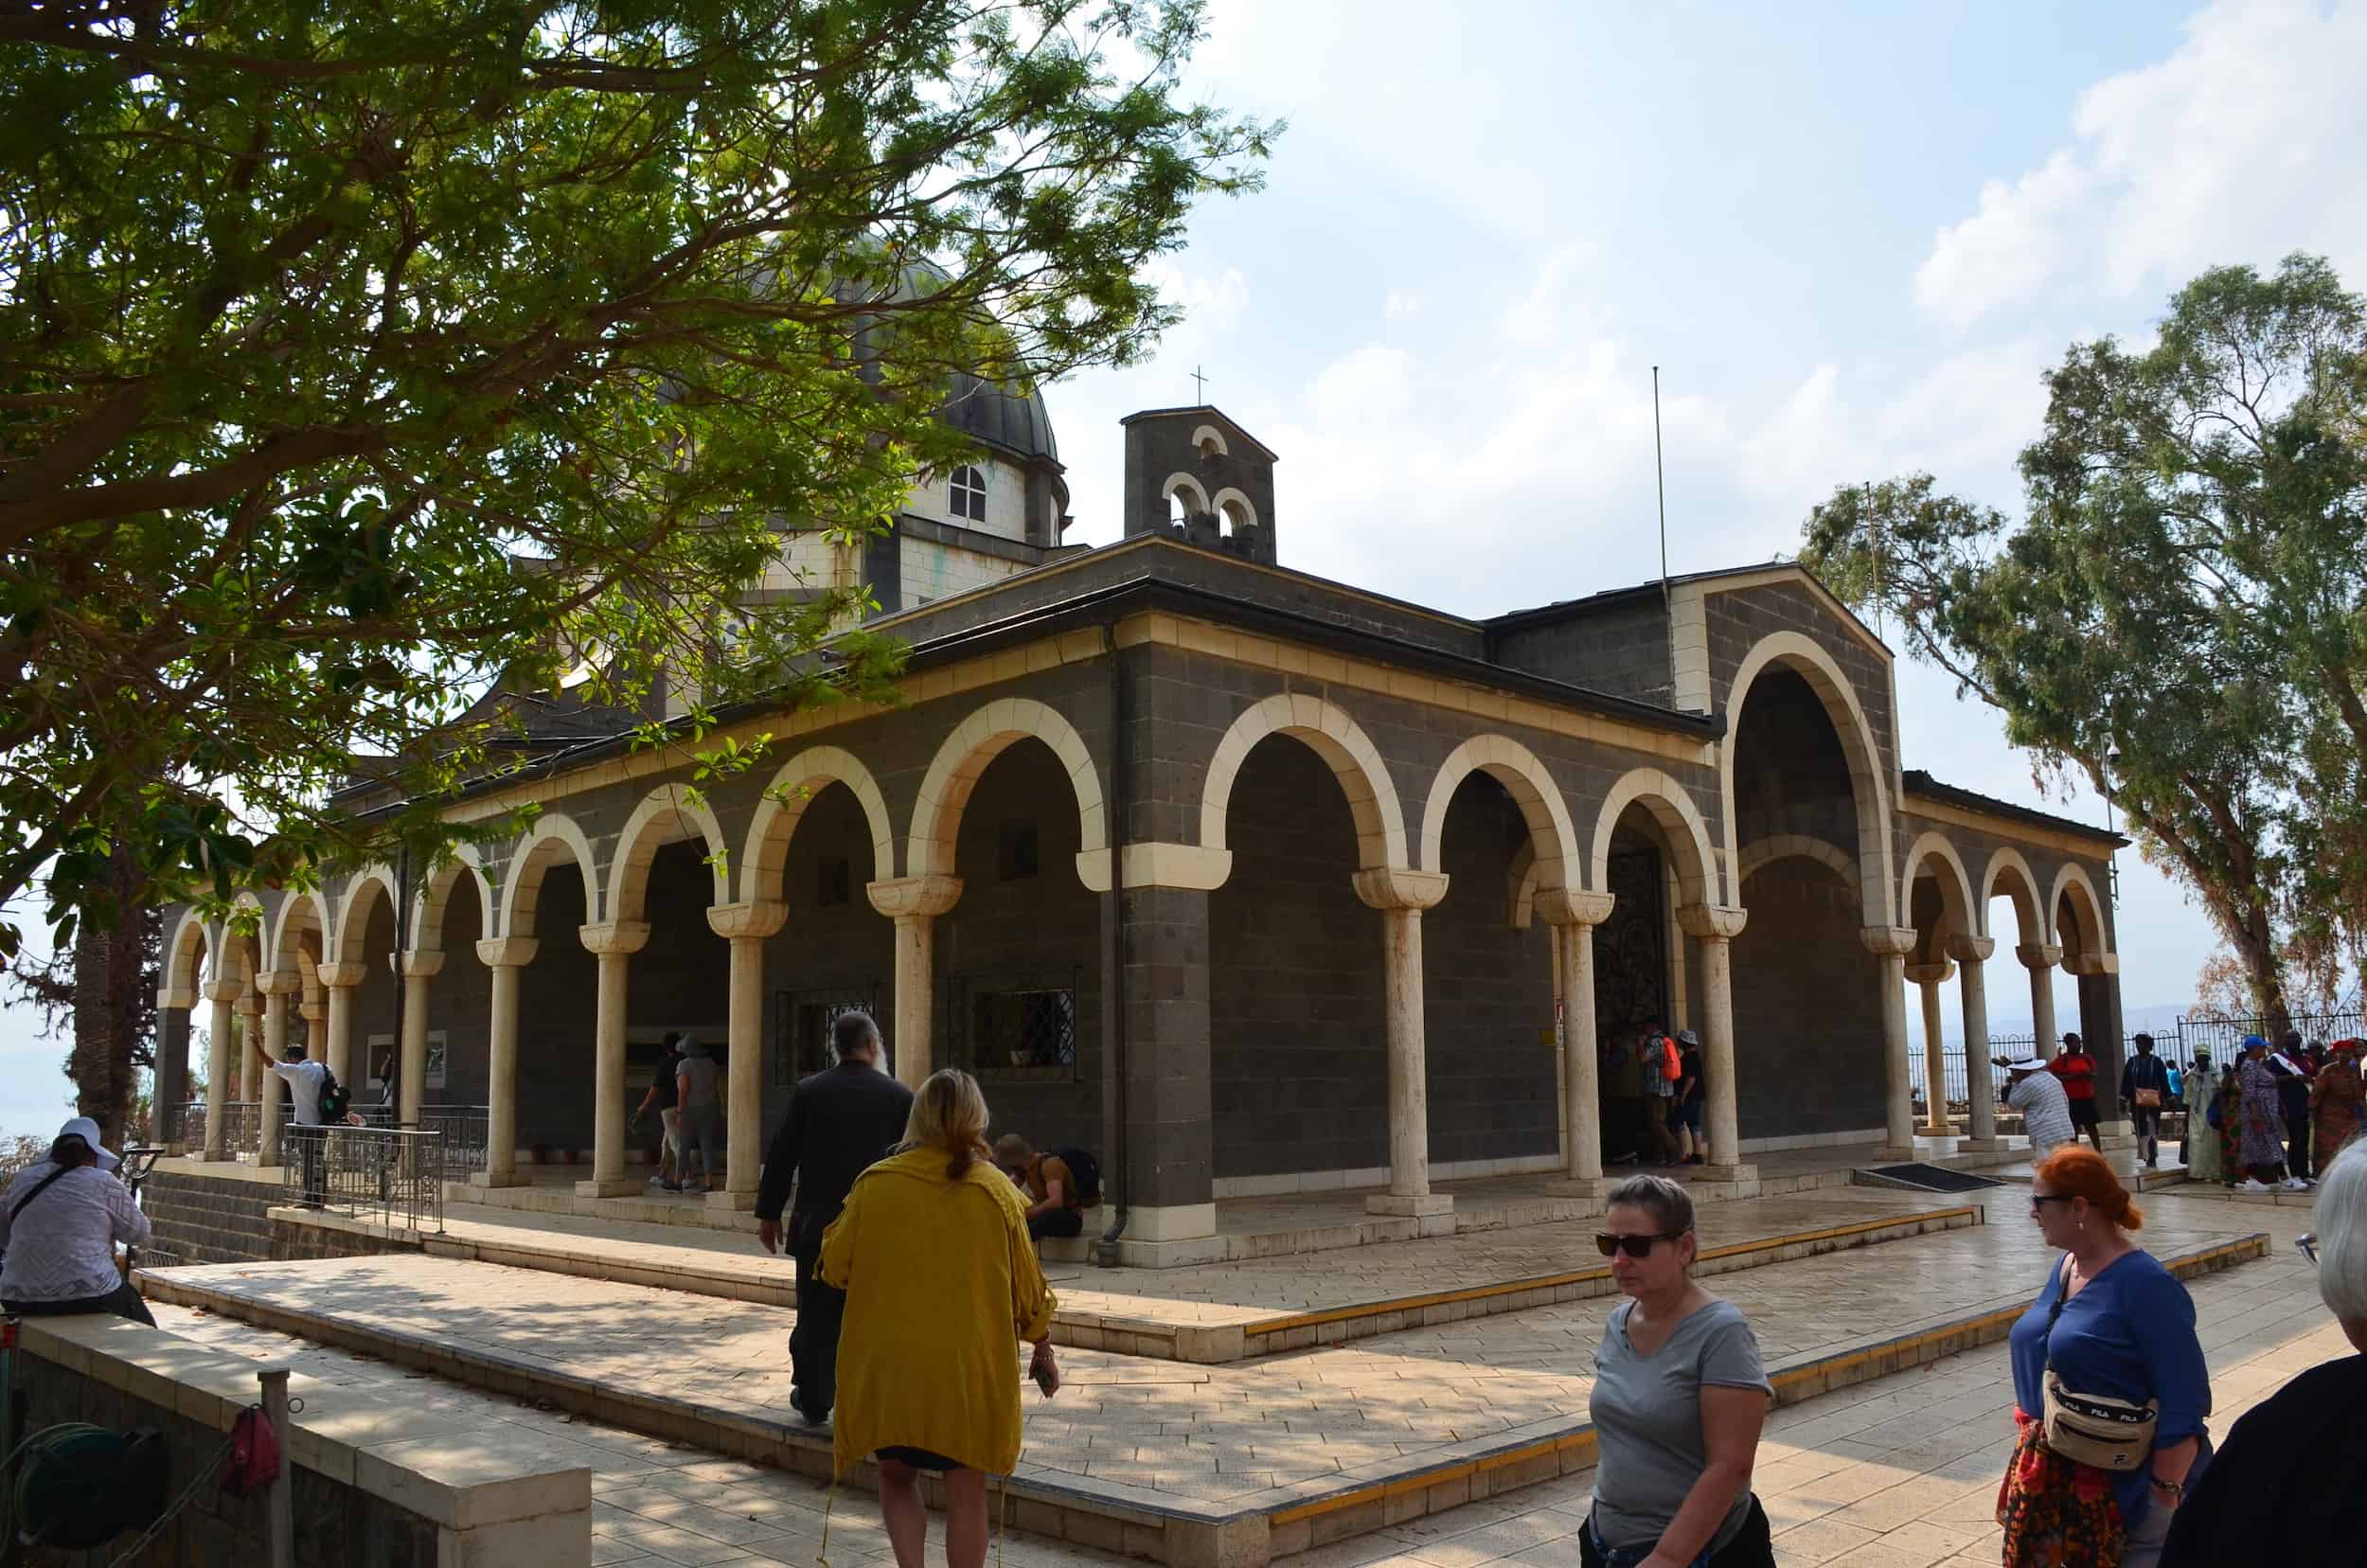 Church of the Beatitudes on the Mount of Beatitudes in Israel